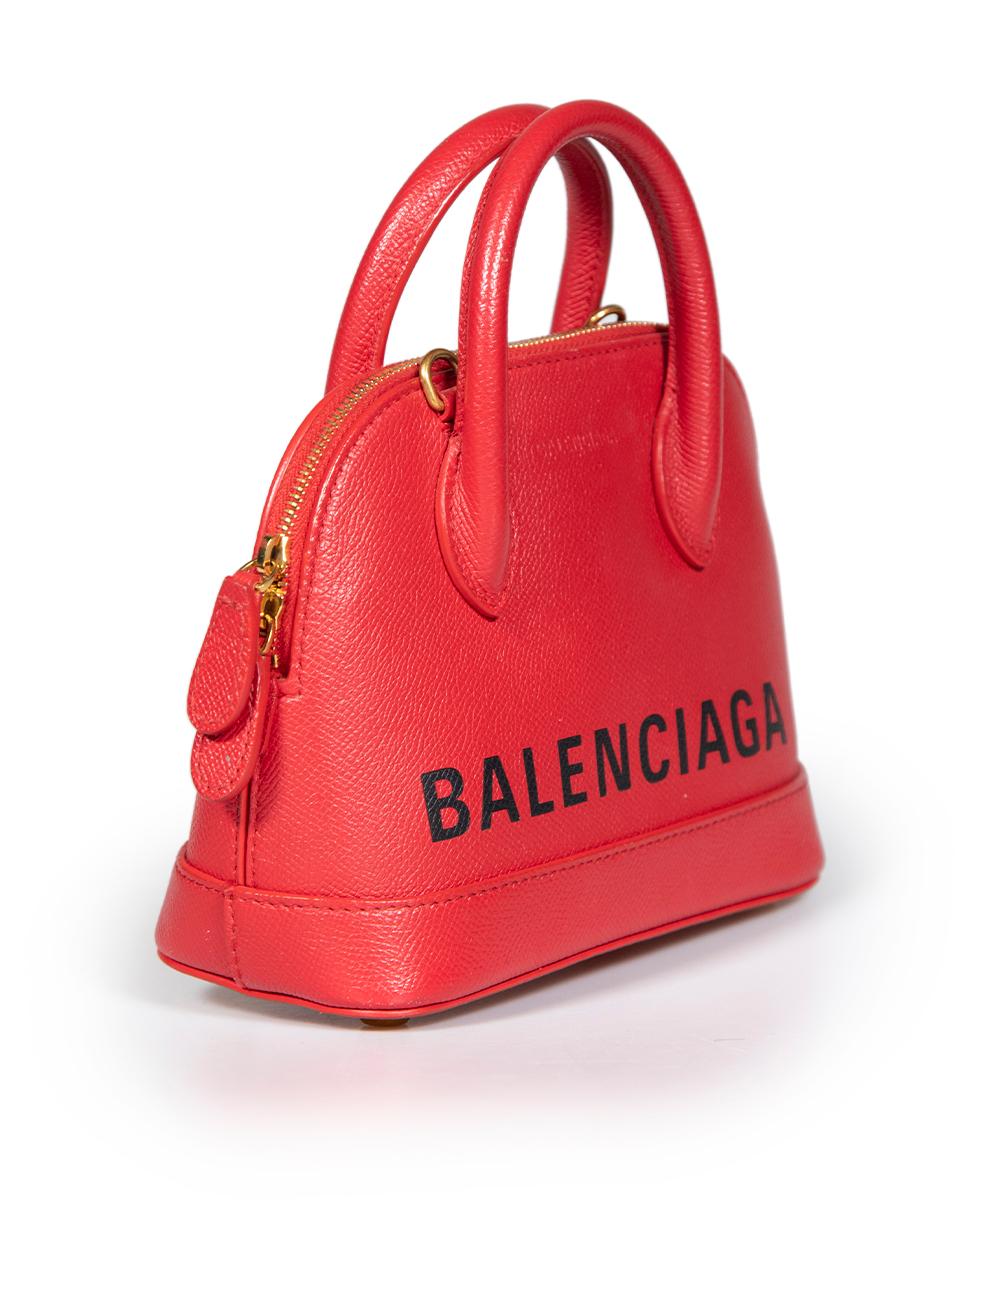 CONDITION is Very good. Minimal wear to bag is evident. Minimal wear to the base corners and the top handles with small abrasions to the leather on this used Balenciaga designer resale item.
 
 
 
 Details
 
 
 Model: Ville
 
 Red
 
 Leather
 
 Mini